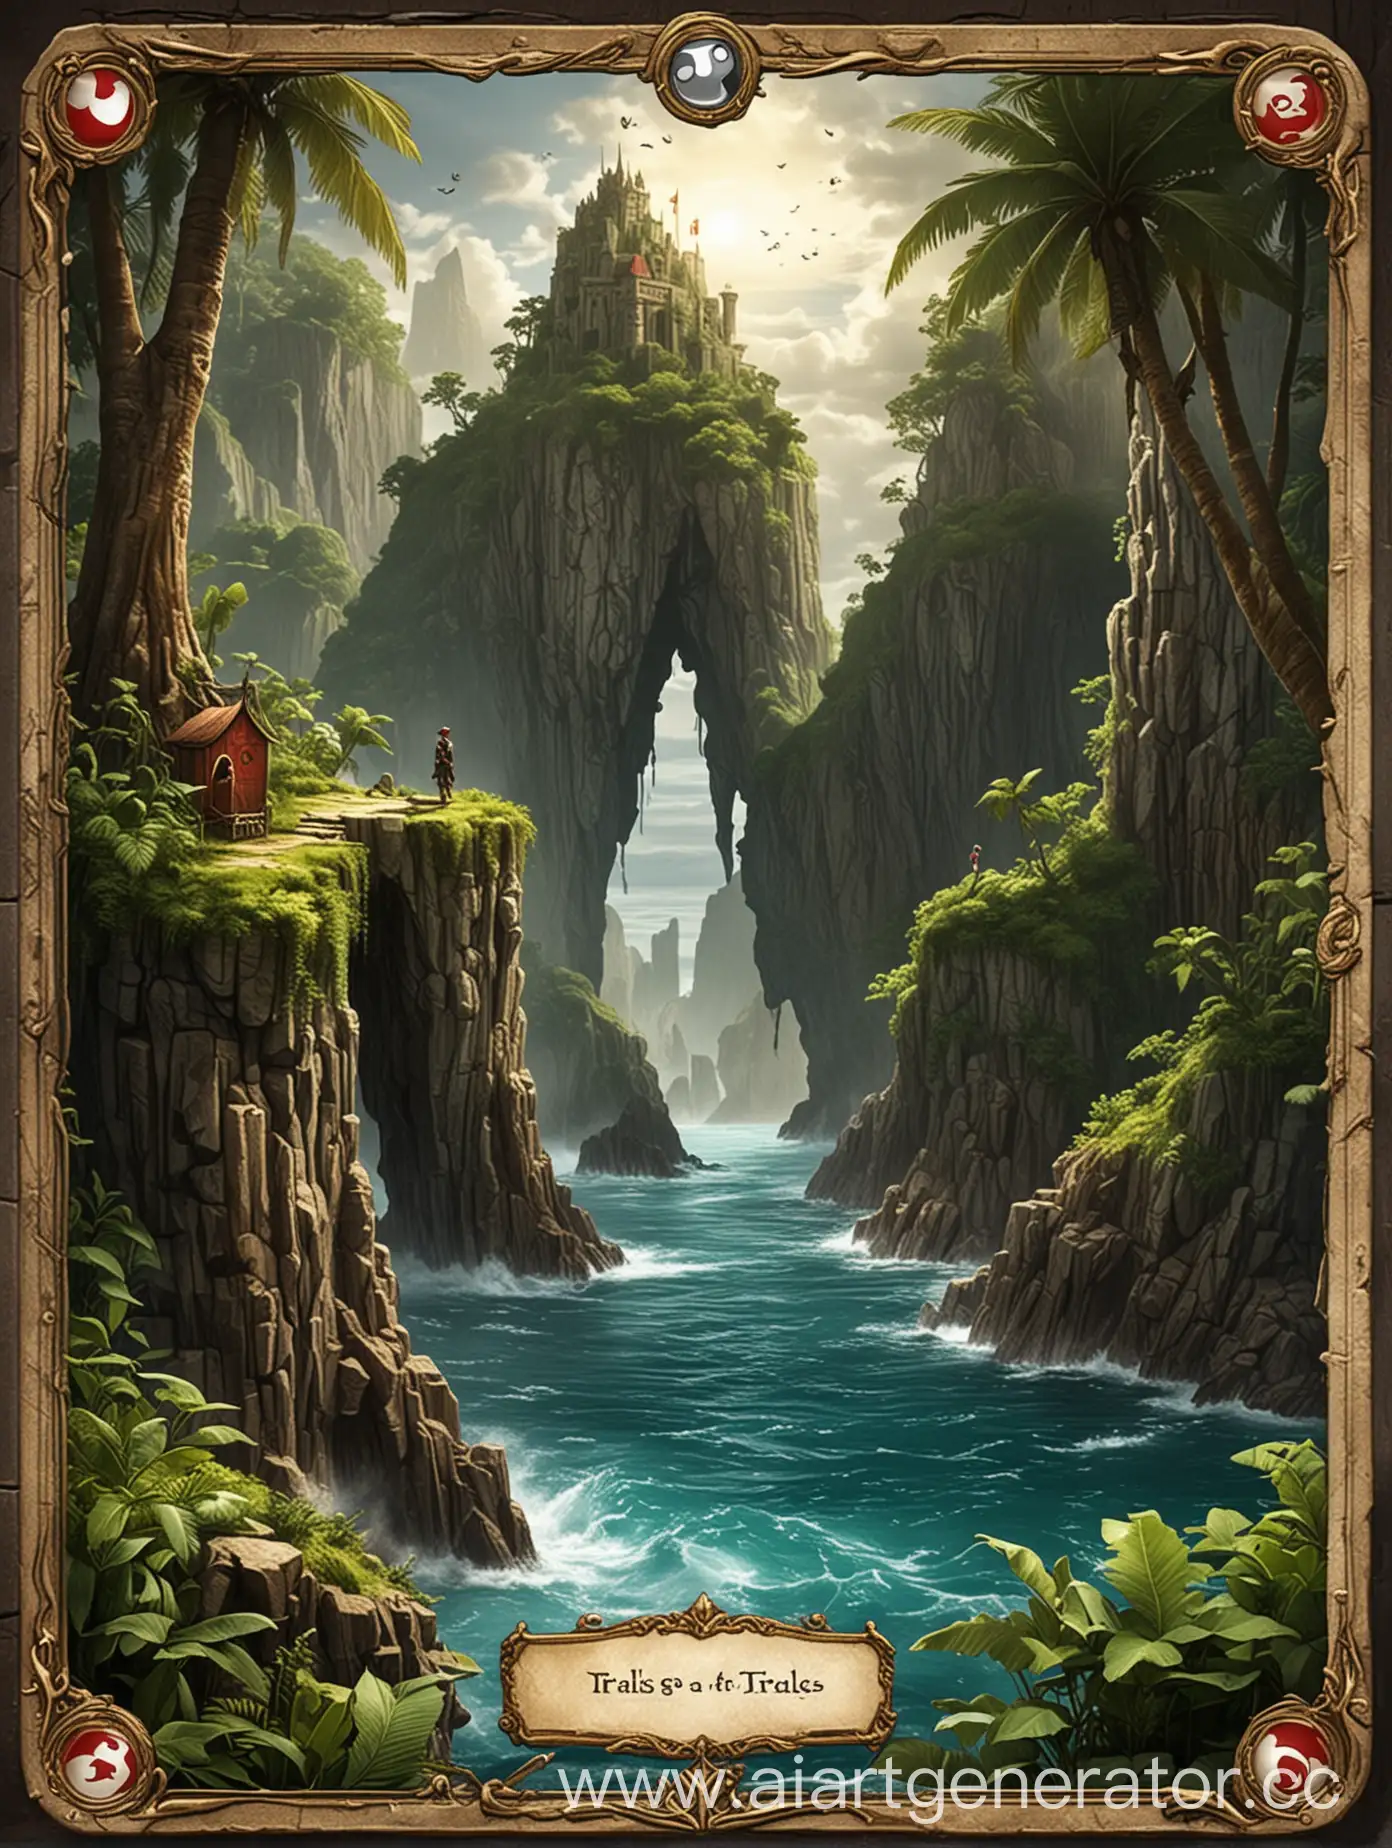 We need the reverse side of the card in a tabletop card game with a mysterious island theme, the deck of cards is called Trials.